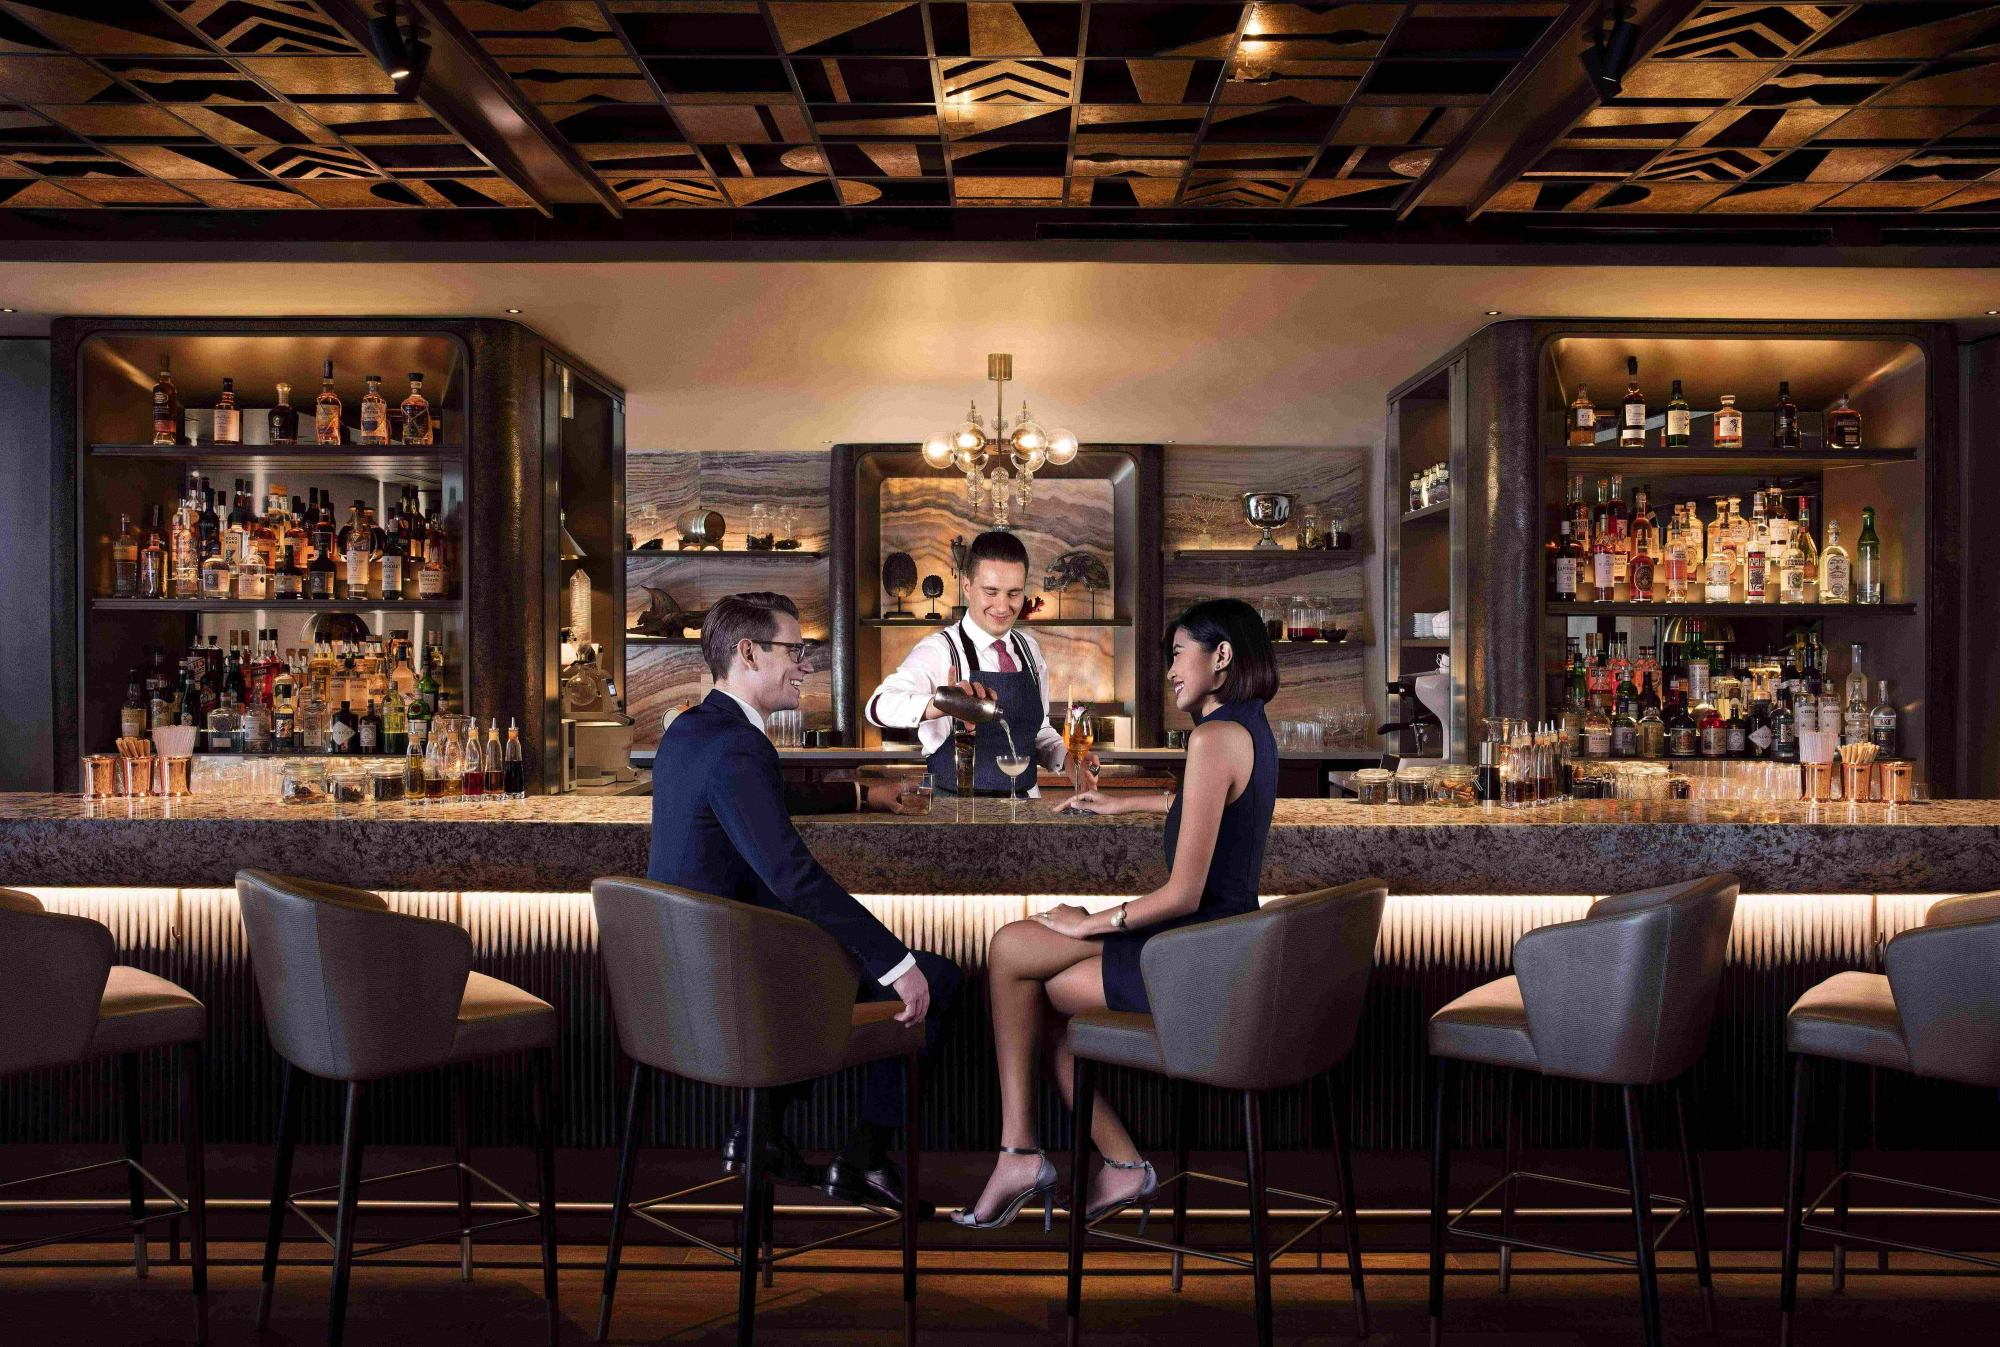 The Mandarin Oriental, Singapore has opened a new bar, the MO Bar. The result of a collaboration with bar developer, Proof & Company, MO Bar is located on the hotel’s fourth floor with floor-to-ceiling views of Marina Bay. Click to enlarge.